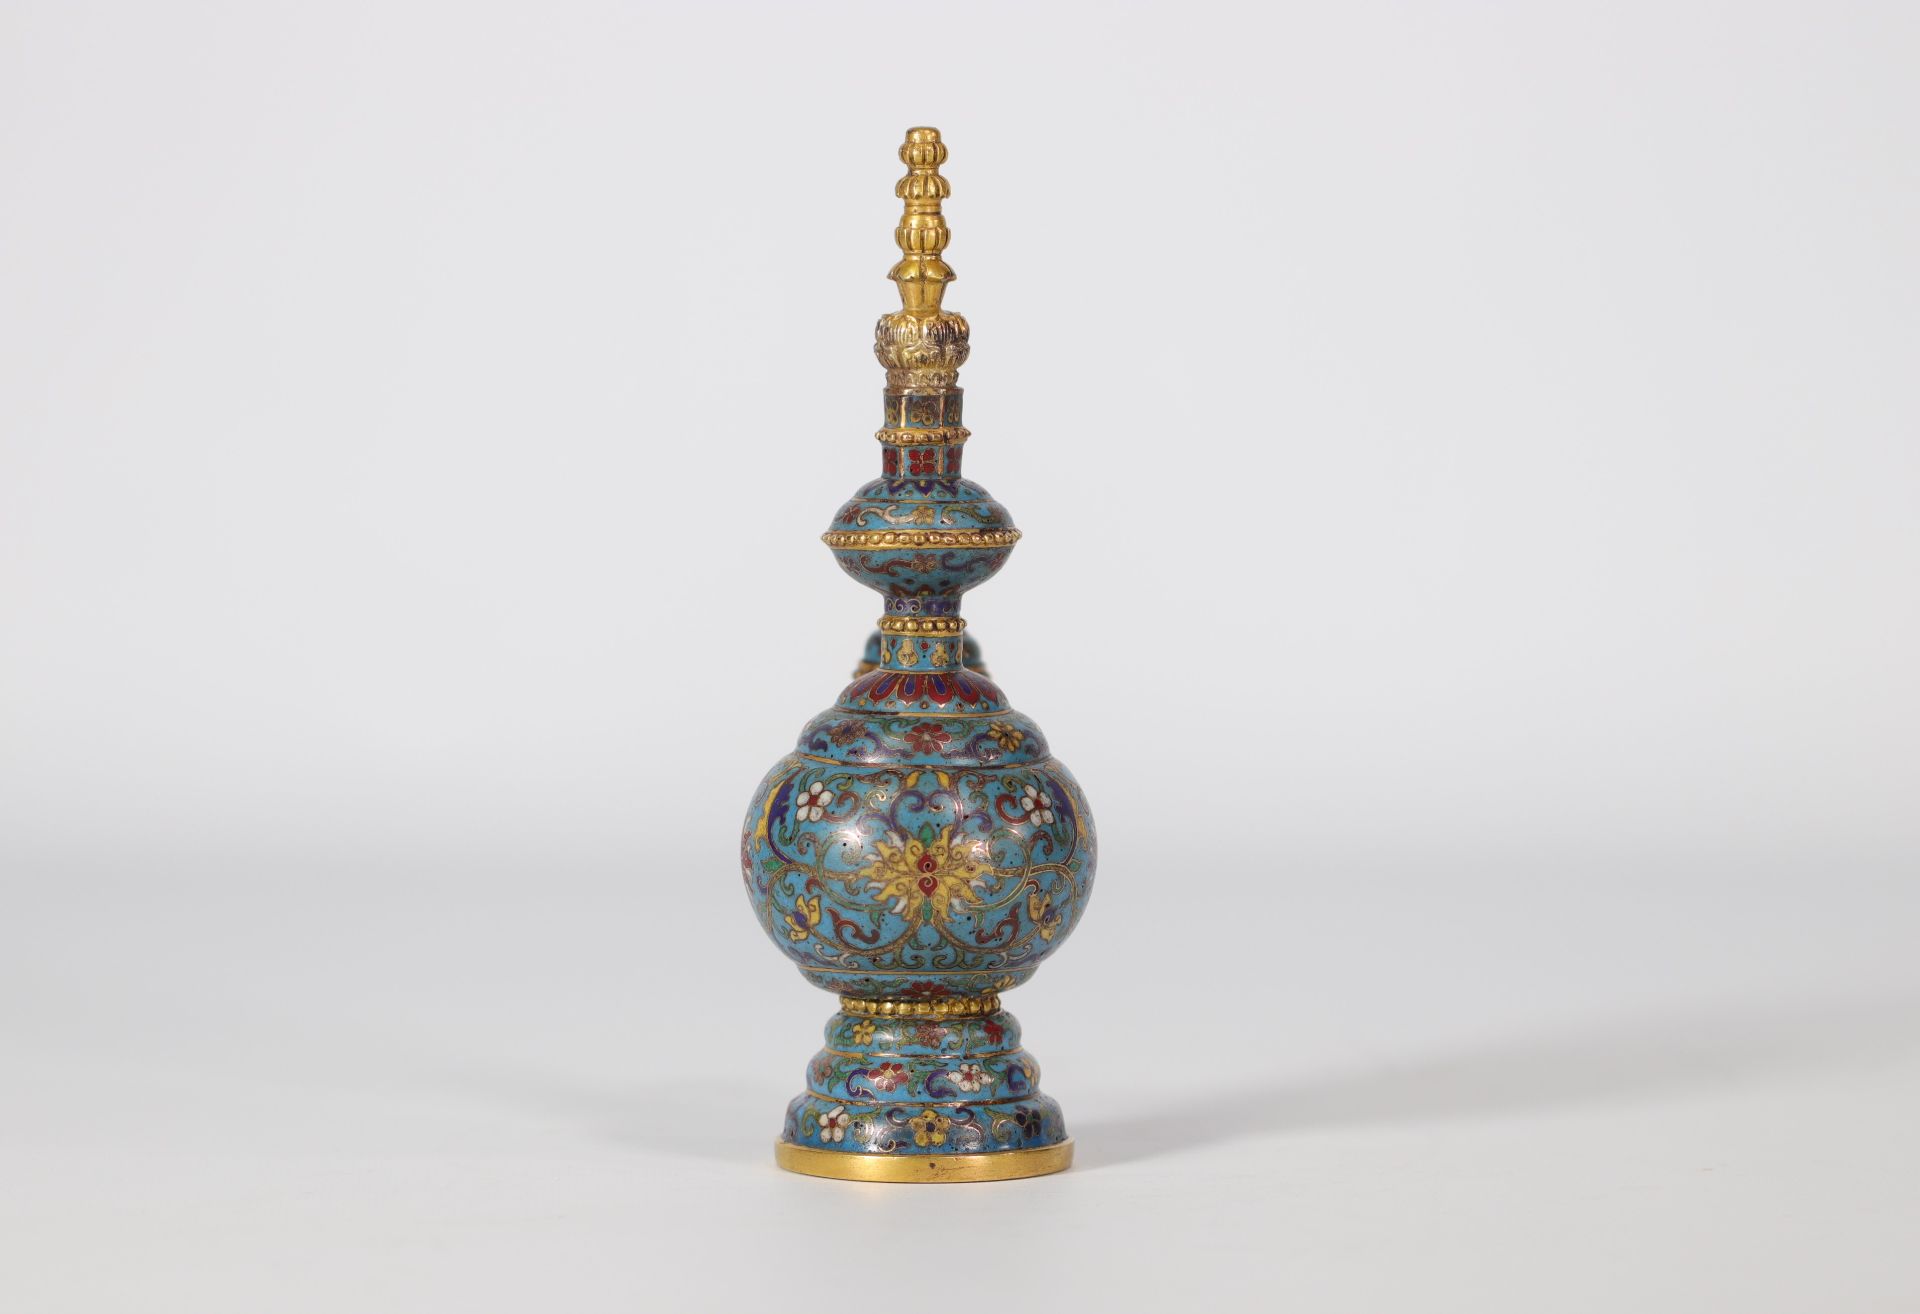 Cloisonne vase with lotus design on a blue background with Qianlong mark from 18th century - Image 3 of 5